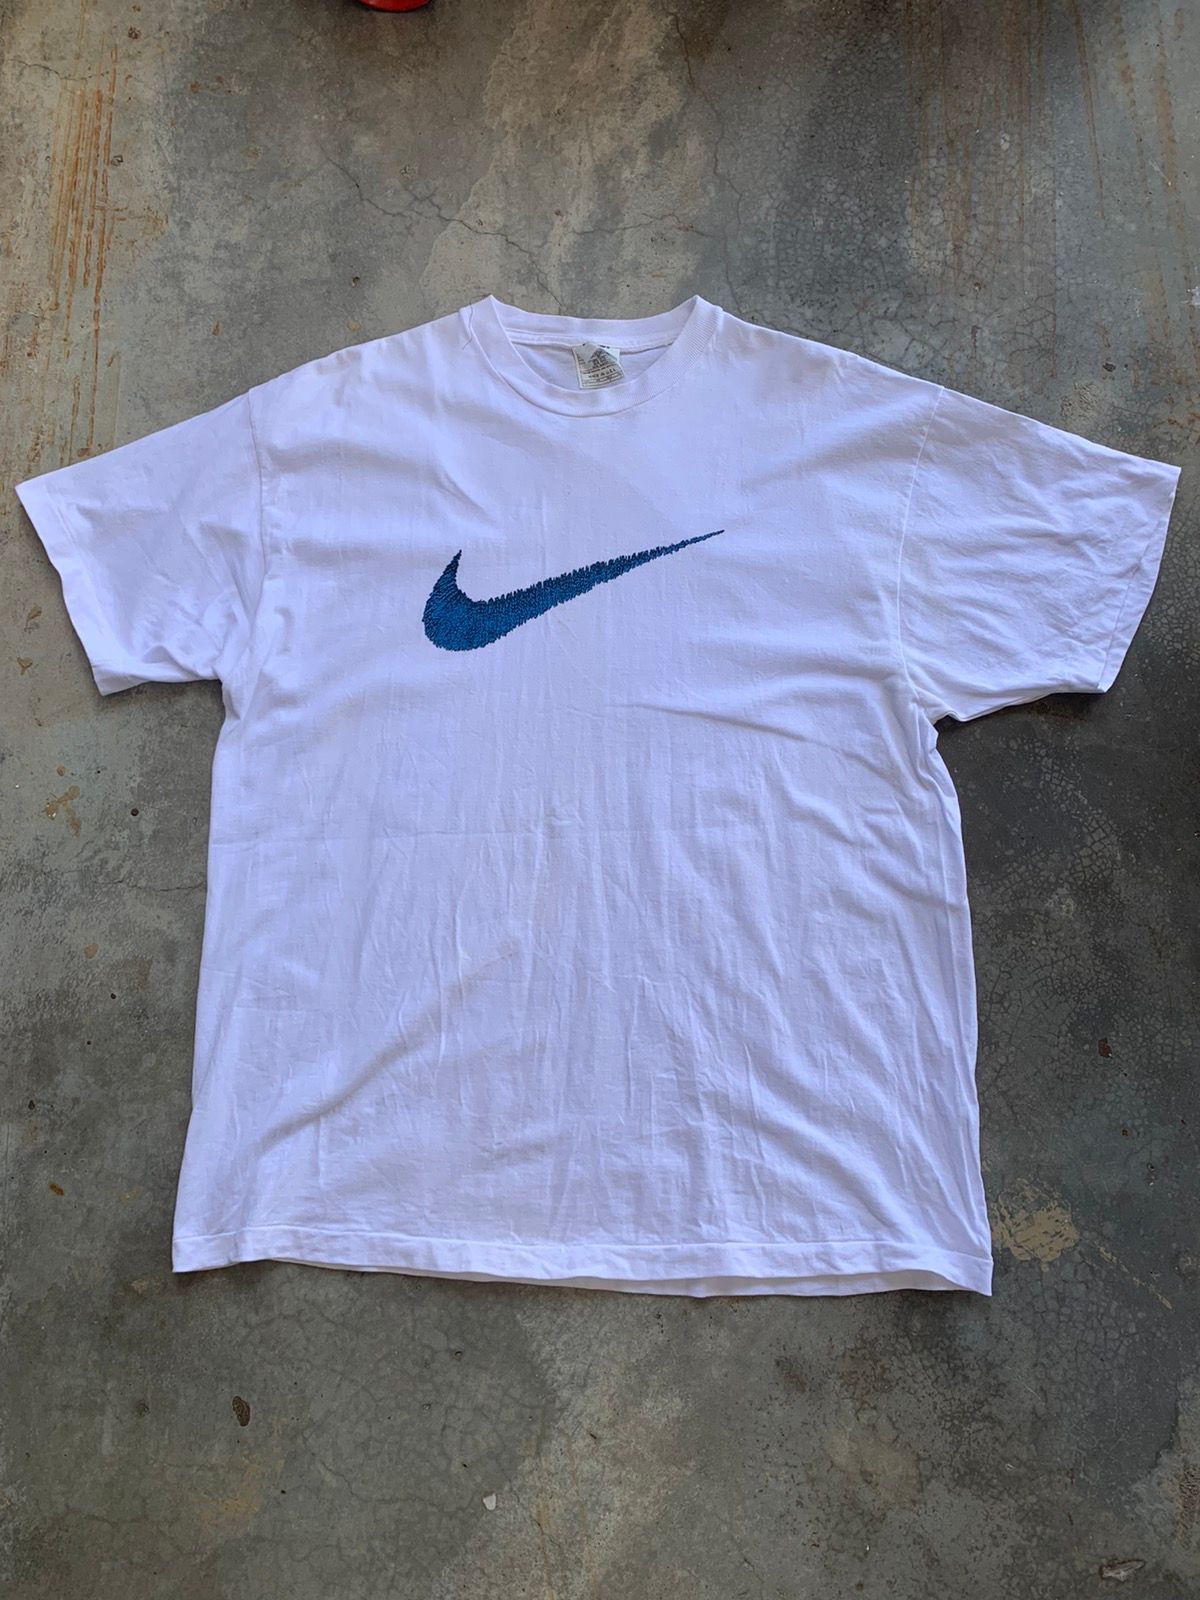 Vintage 90s Made In Usa Nike Swoosh Single Stich Tshirt - 1